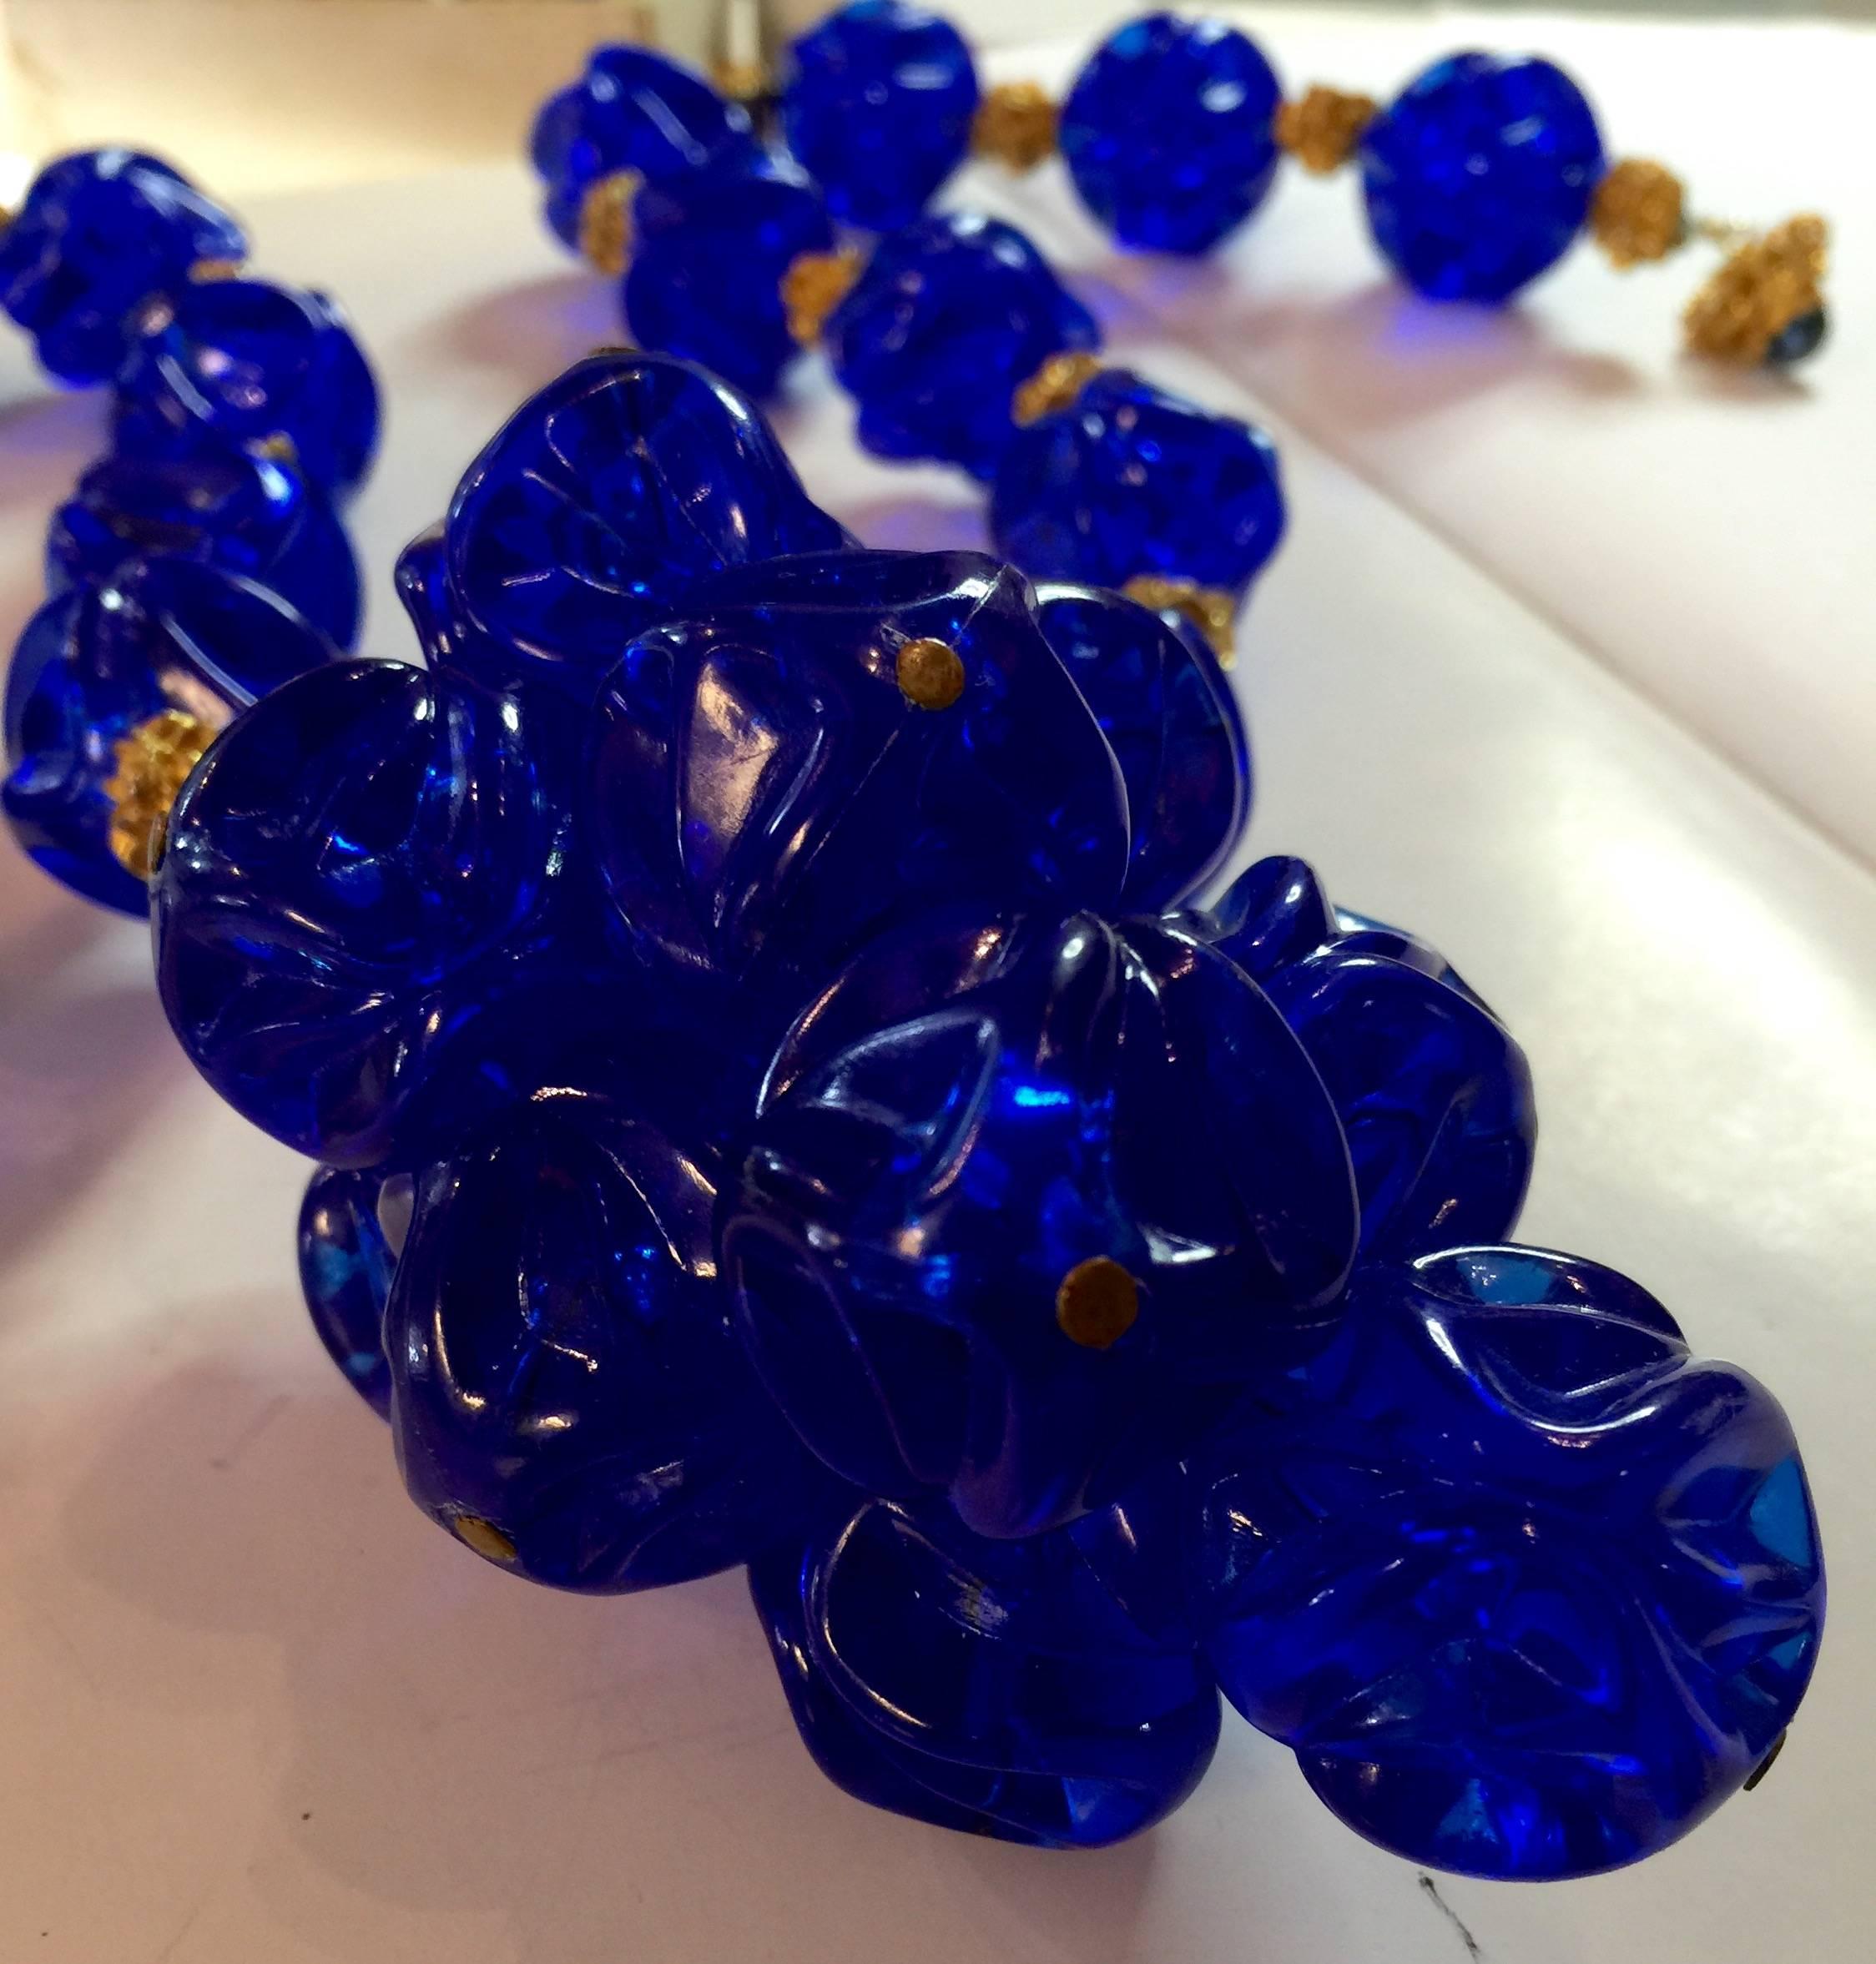 This  1970s William deLillo Amazing Electric Blue Resin Grape Cluster Necklace is highly unusual in color and execution. The resin molded beads are melon bead like in form, but much larger and more dramatic. There are brutalist figured goldtone